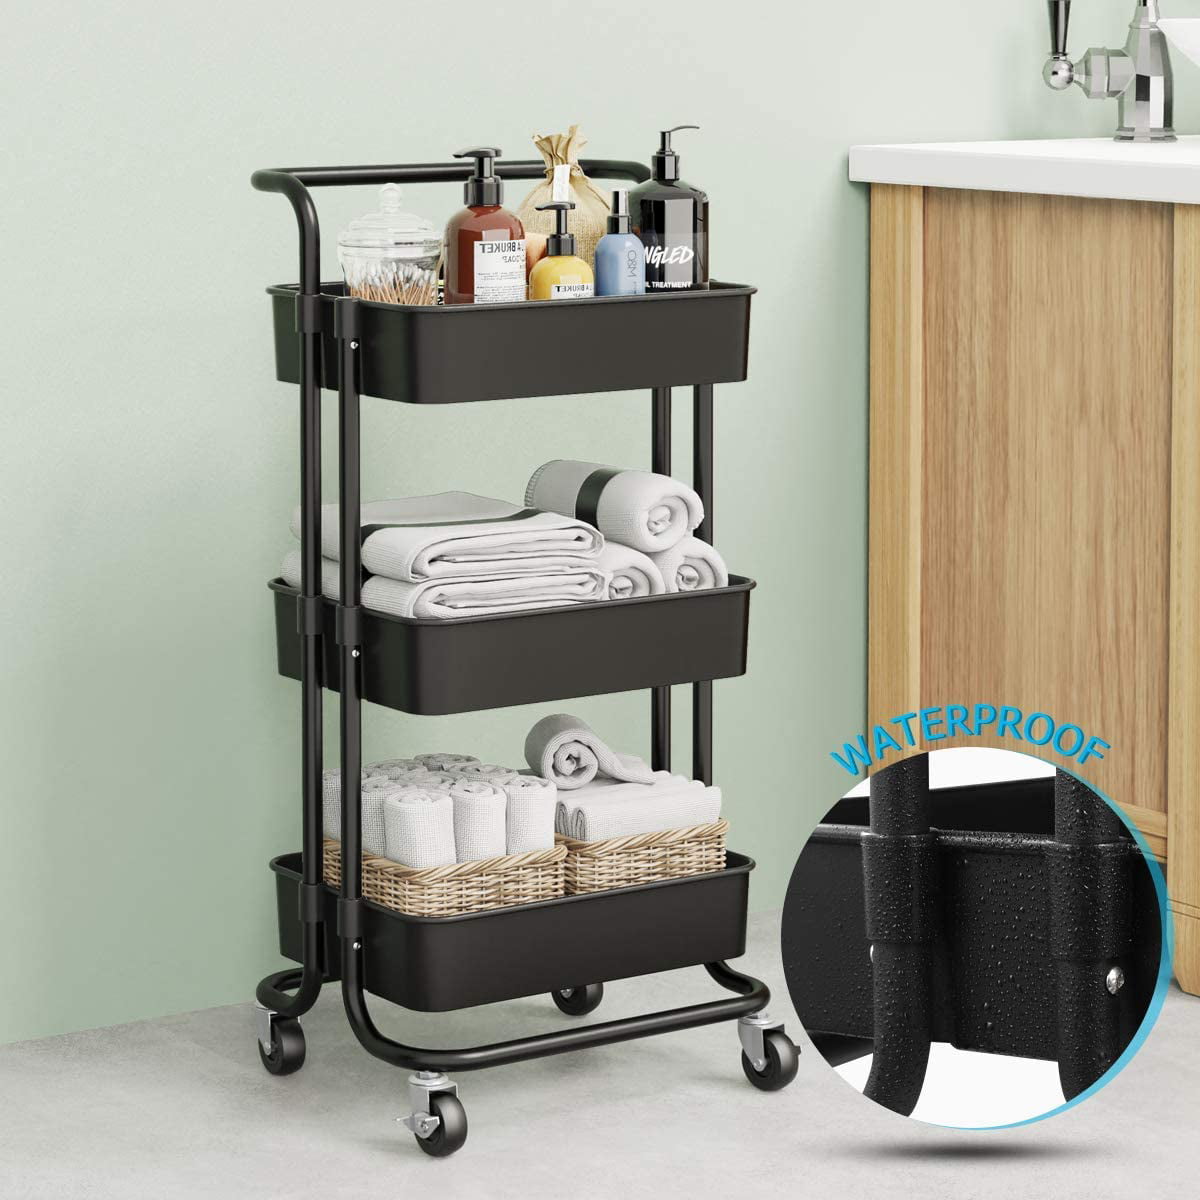 Utility Cart with Wheels, CRAFTFORCE 3-Tier Food Service Cart, Heavy Duty  528lbs Capacity Rolling Utility Cart with Lockable Wheels for Office,  Kitchen, Garage, Warehouse, 31.5 x 16.9 x 37.8, Black - Yahoo